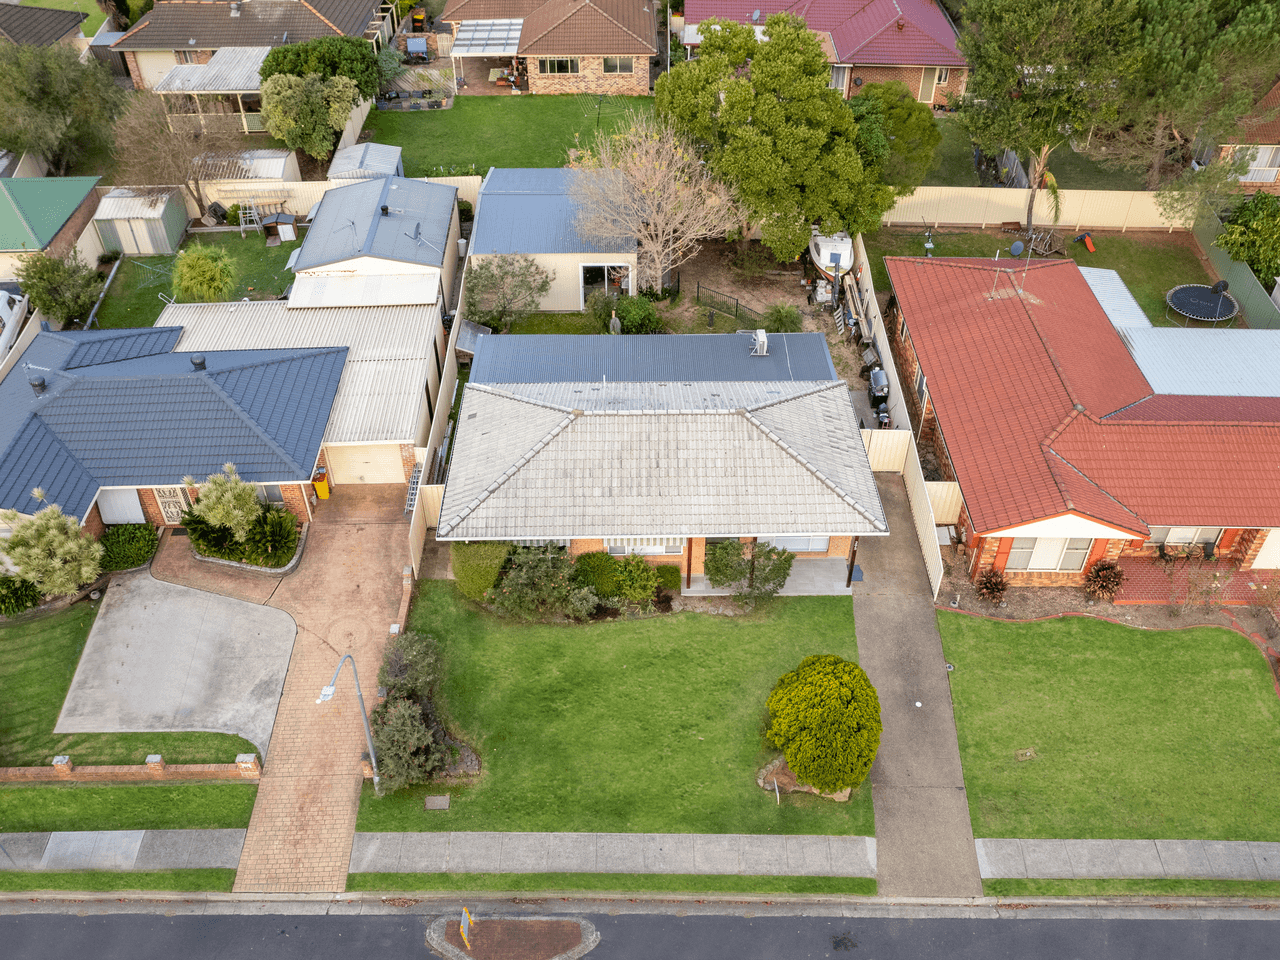 295 welling Dr, MOUNT ANNAN, NSW 2567